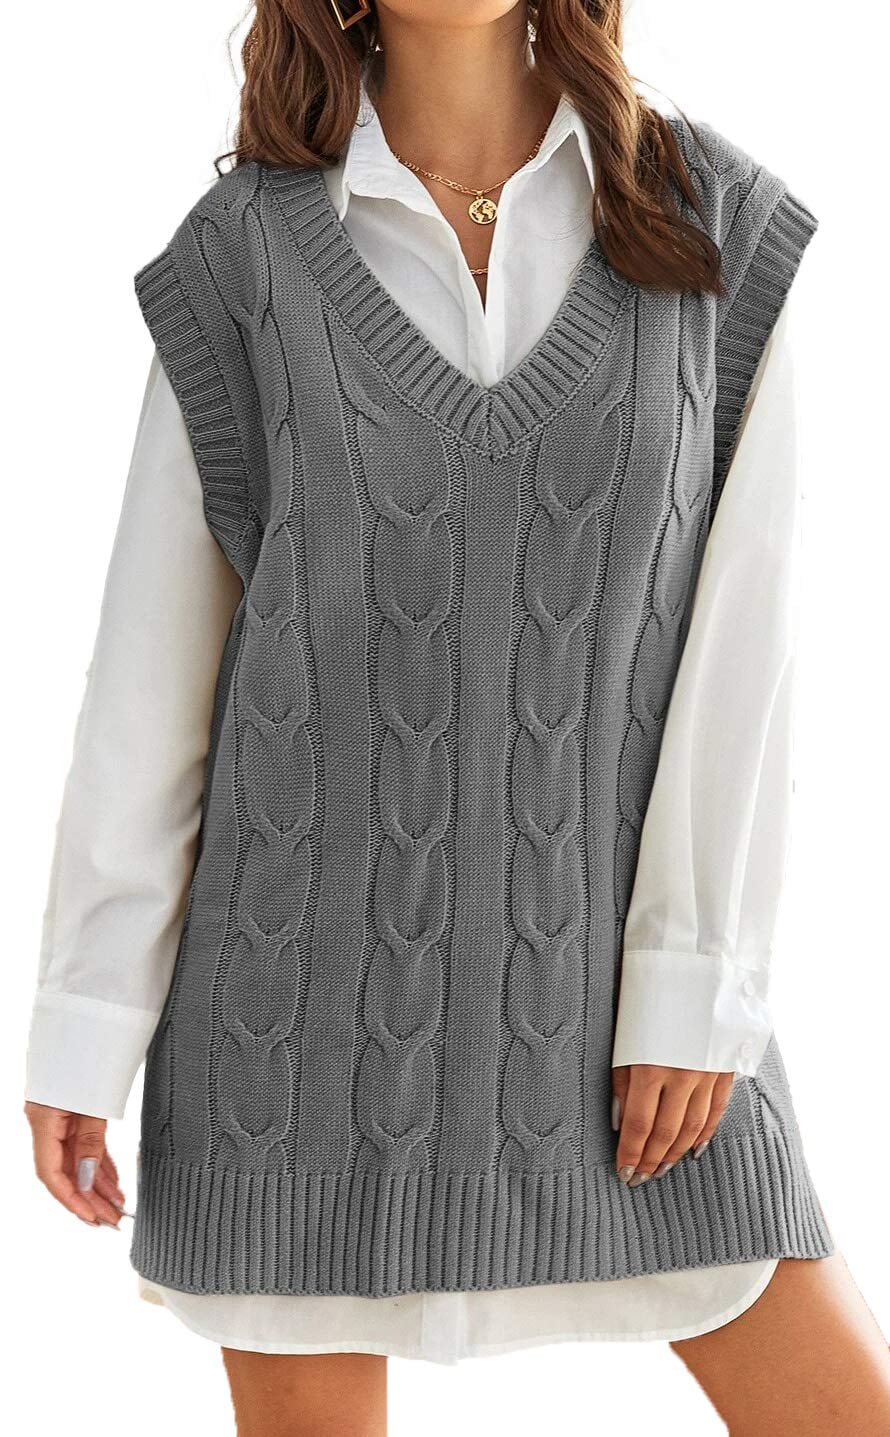 Sherrylily Women Sweater Vest Oversized Cable Knit Pullover V Neck  Sleeveless Jumpers